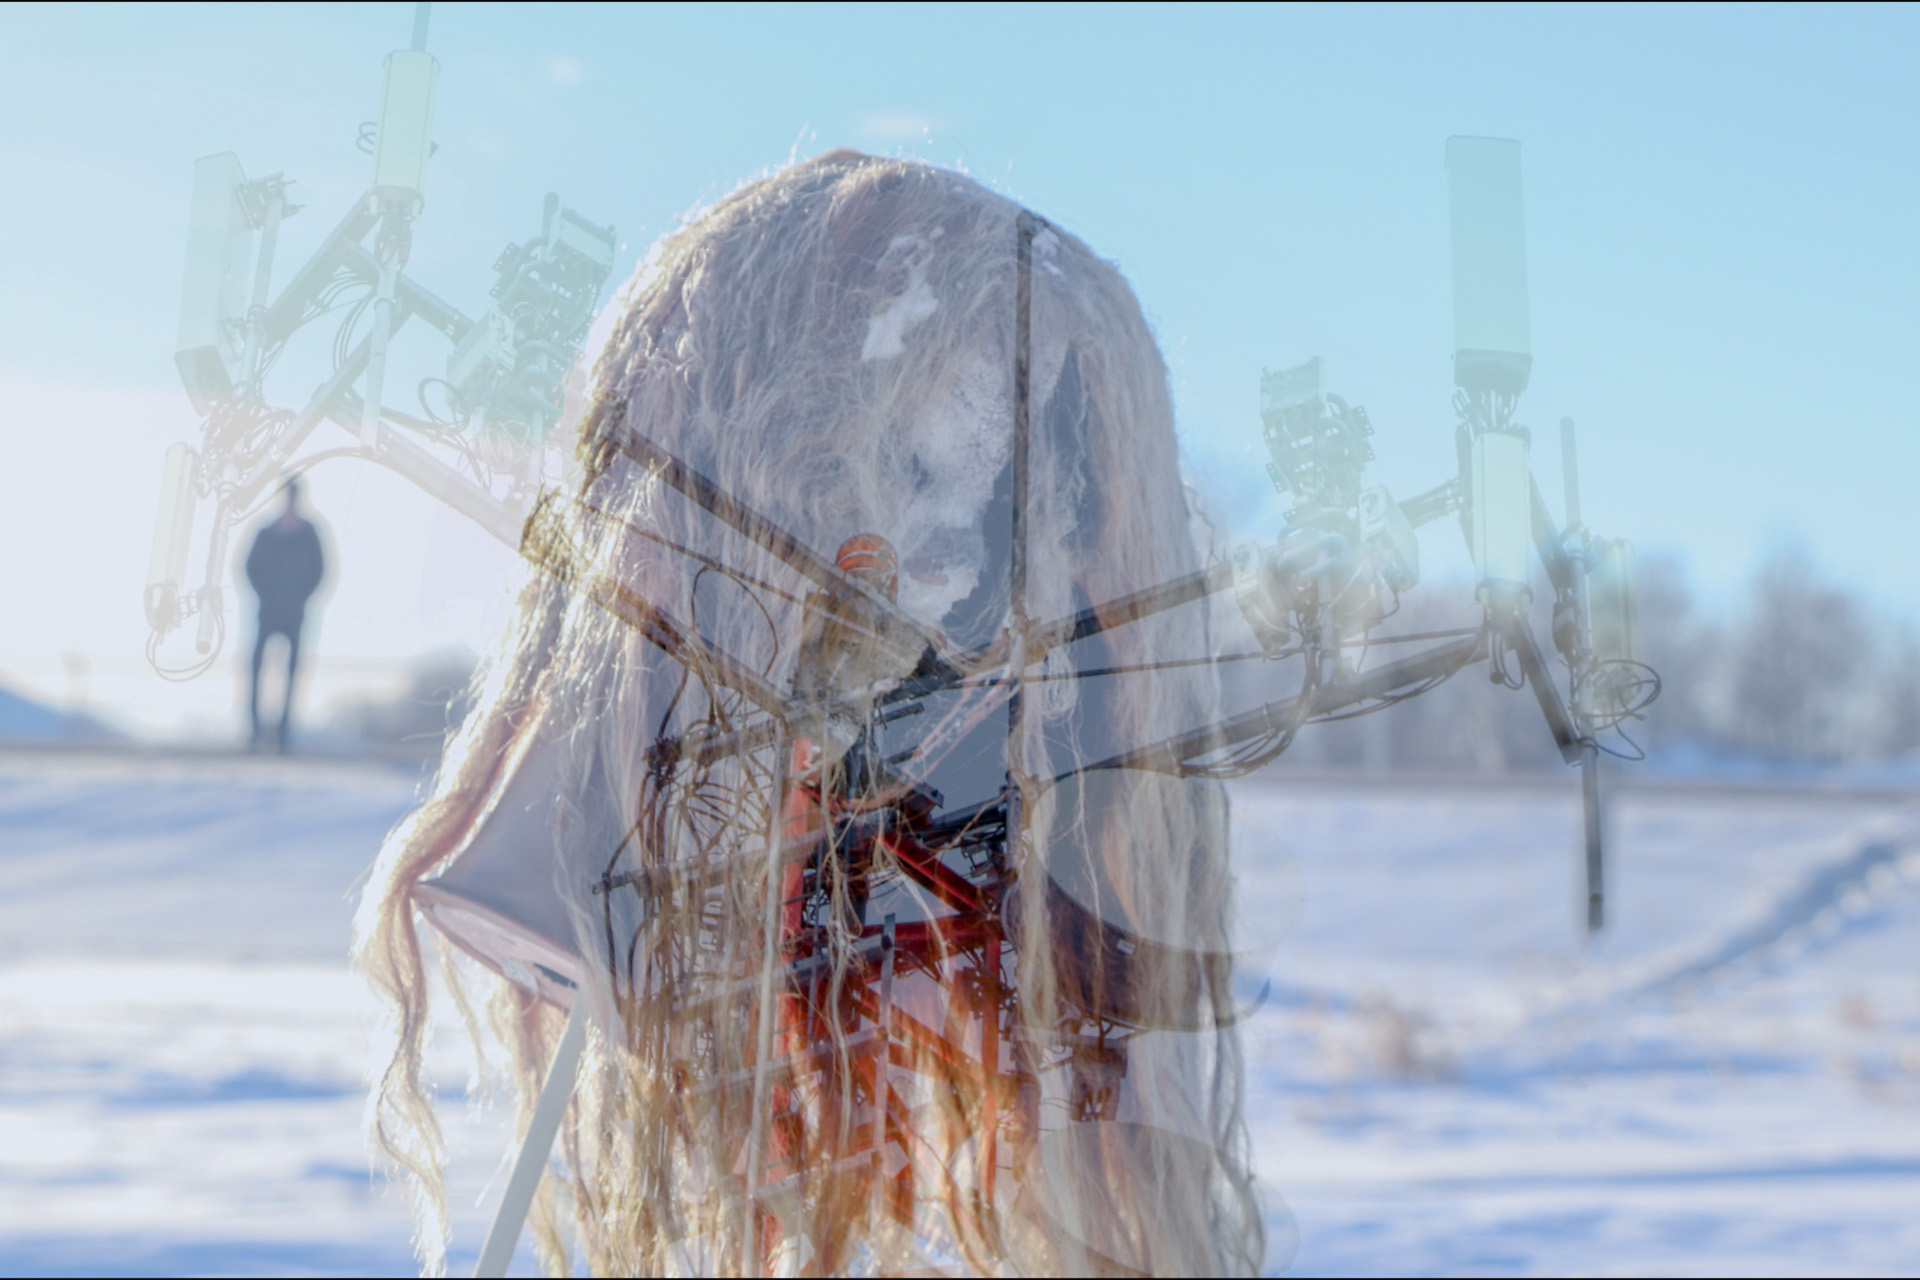 The background of this image is cold and white, like a snowscape.  Front and centre is a disturbing figure: a matted, stringy blonde head of long hair gives the suggestion of a human upper body.  Superimposed is a translucent cell tower structure, its technical, sharp angles creating a harsh juxtaposition to the organic form of the figure.    Unsettlingly, the dim silhouette of a second figure stands motionless and unfocussed on the horizon to the left.